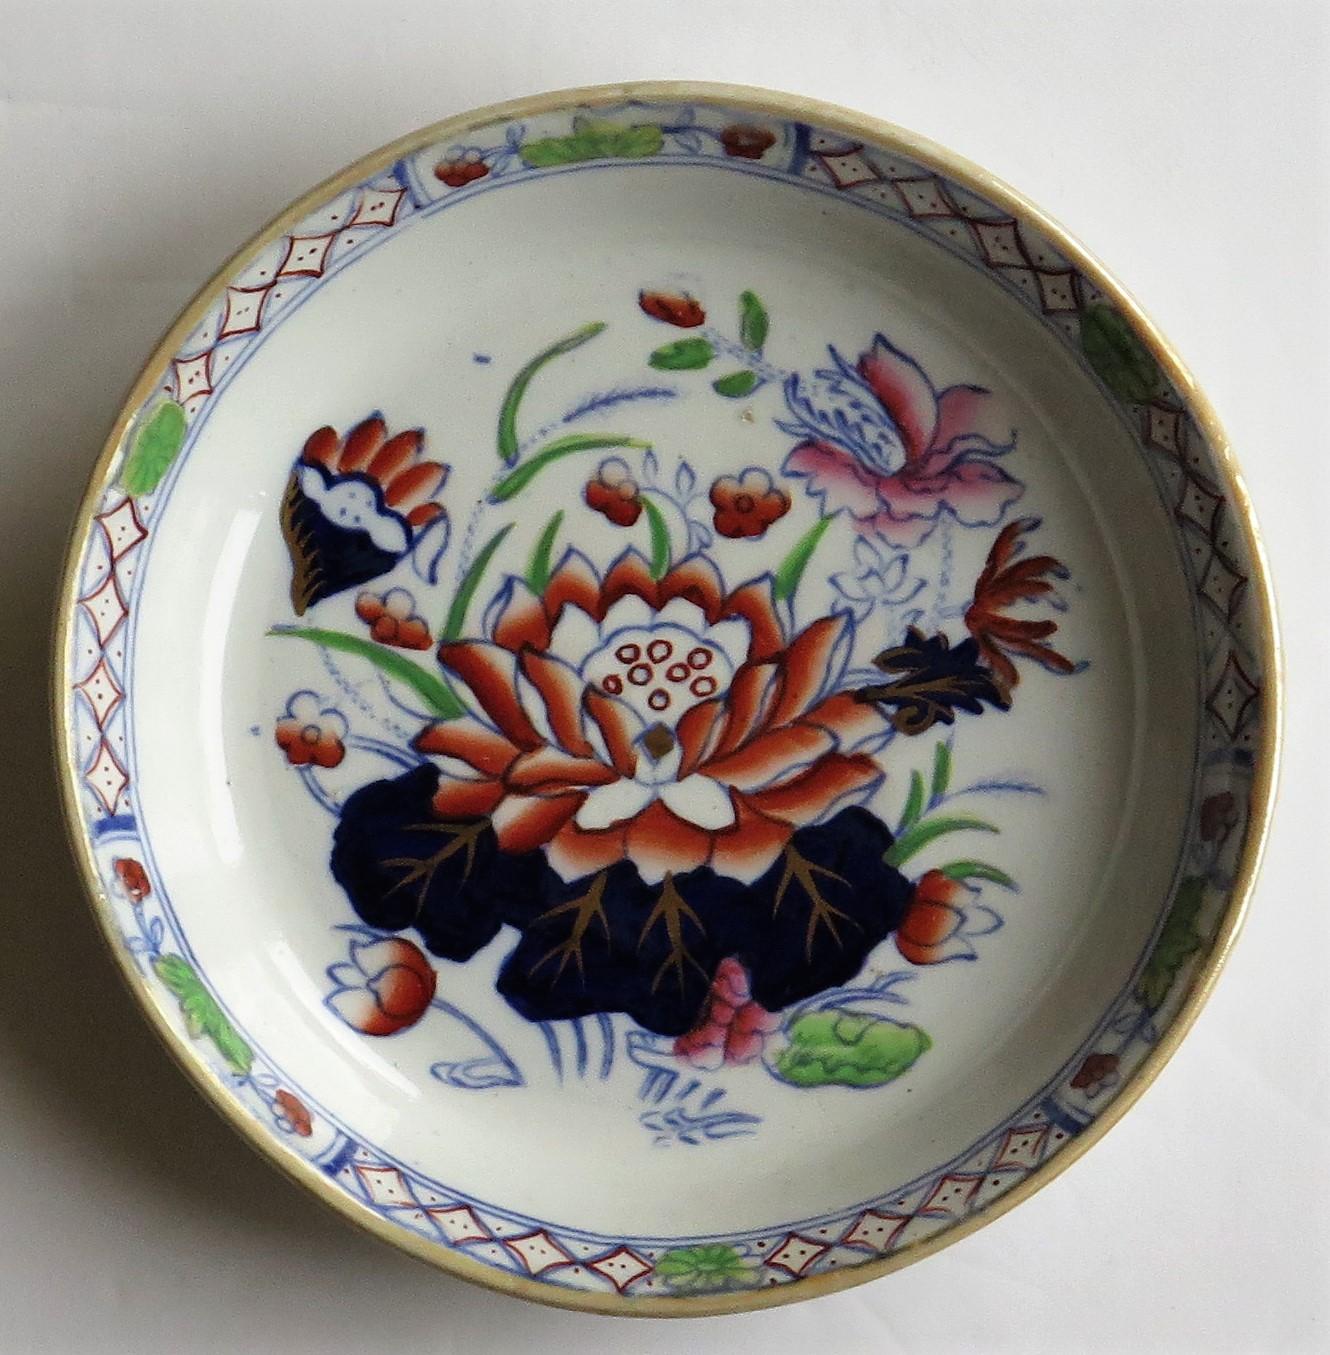 This is a small dish or pin tray in the very decorative water lily pattern, produced by the Mason's factory at Lane Delph, Staffordshire, England, circa 1897.

The dish is well decorated in one of Mason's most beautiful chinoiserie patterns,